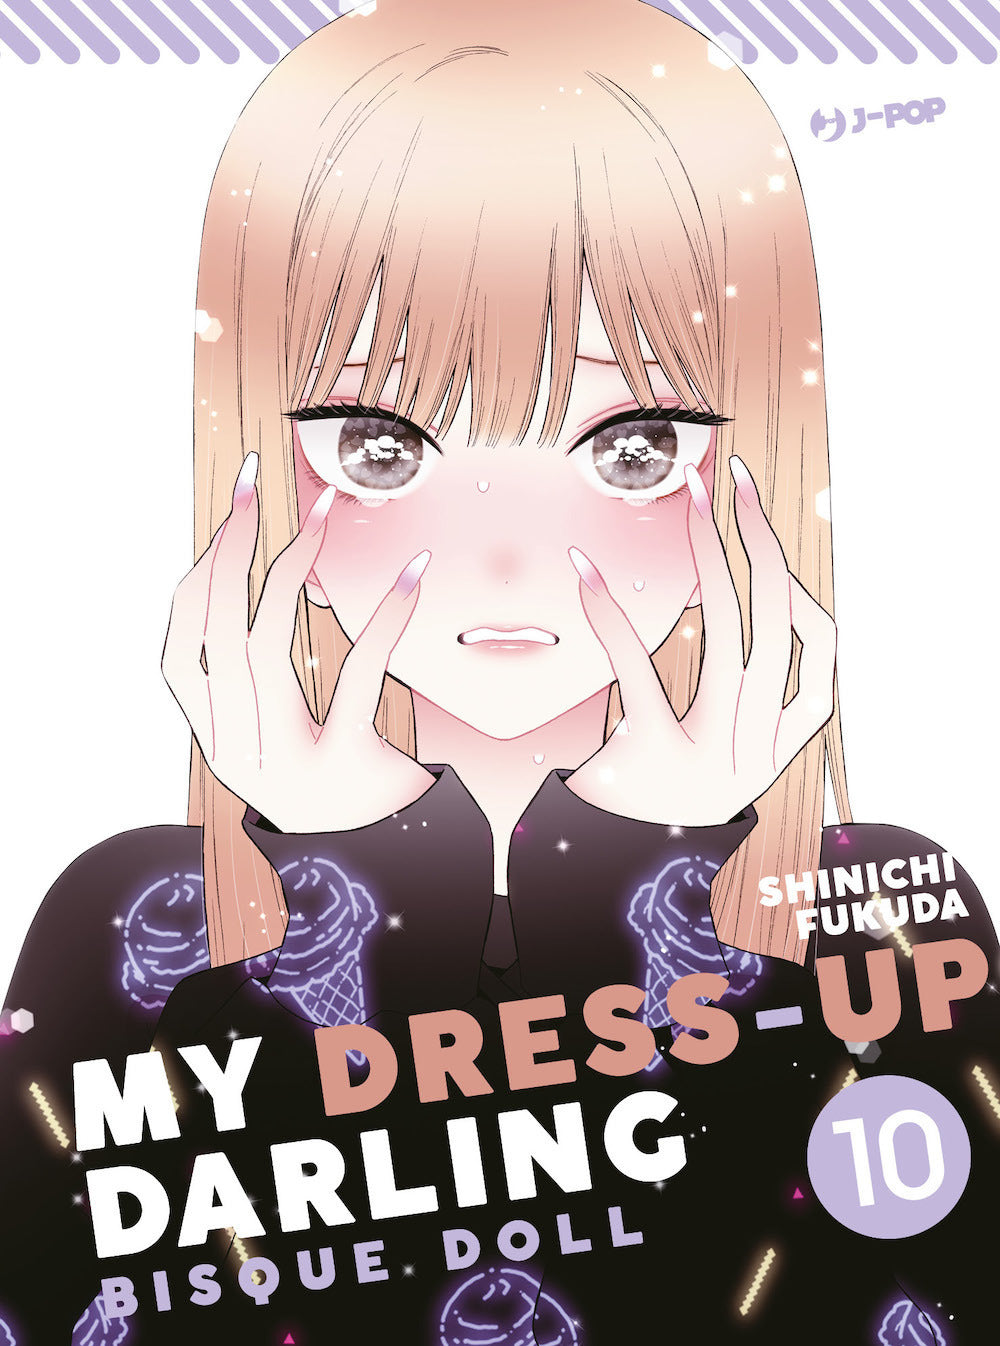 My dress up darling. Bisque doll. Vol. 10